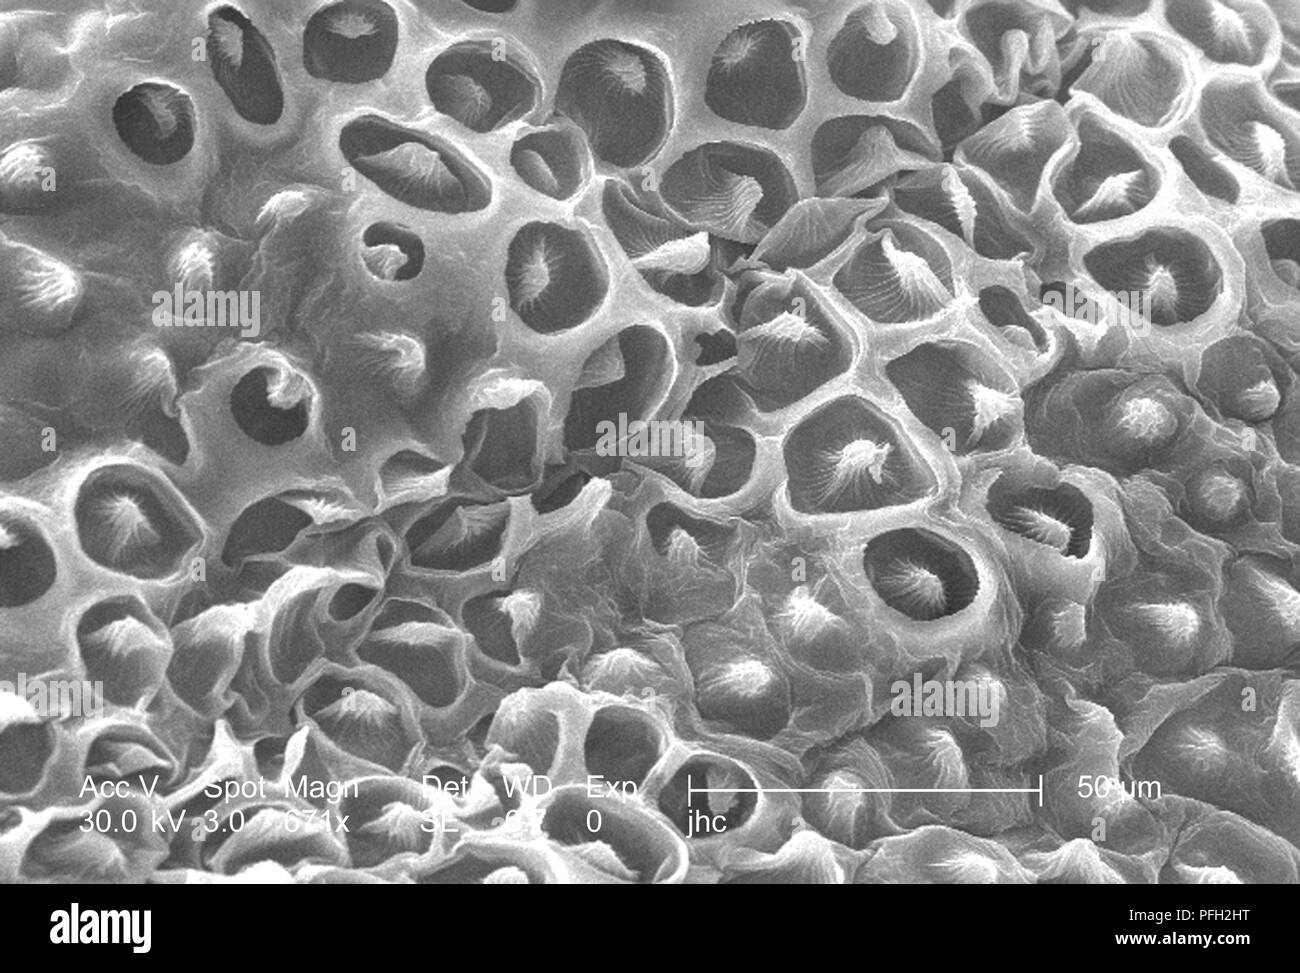 Ultrastructural details on the surface of a 'crimson clover', Trifolium incarnatum flower petal, revealed in the 671x magnified scanning electron microscopic (SEM) image, 2006. Image courtesy Centers for Disease Control (CDC) / Janice Haney Carr, Betsy Crane. () Stock Photo